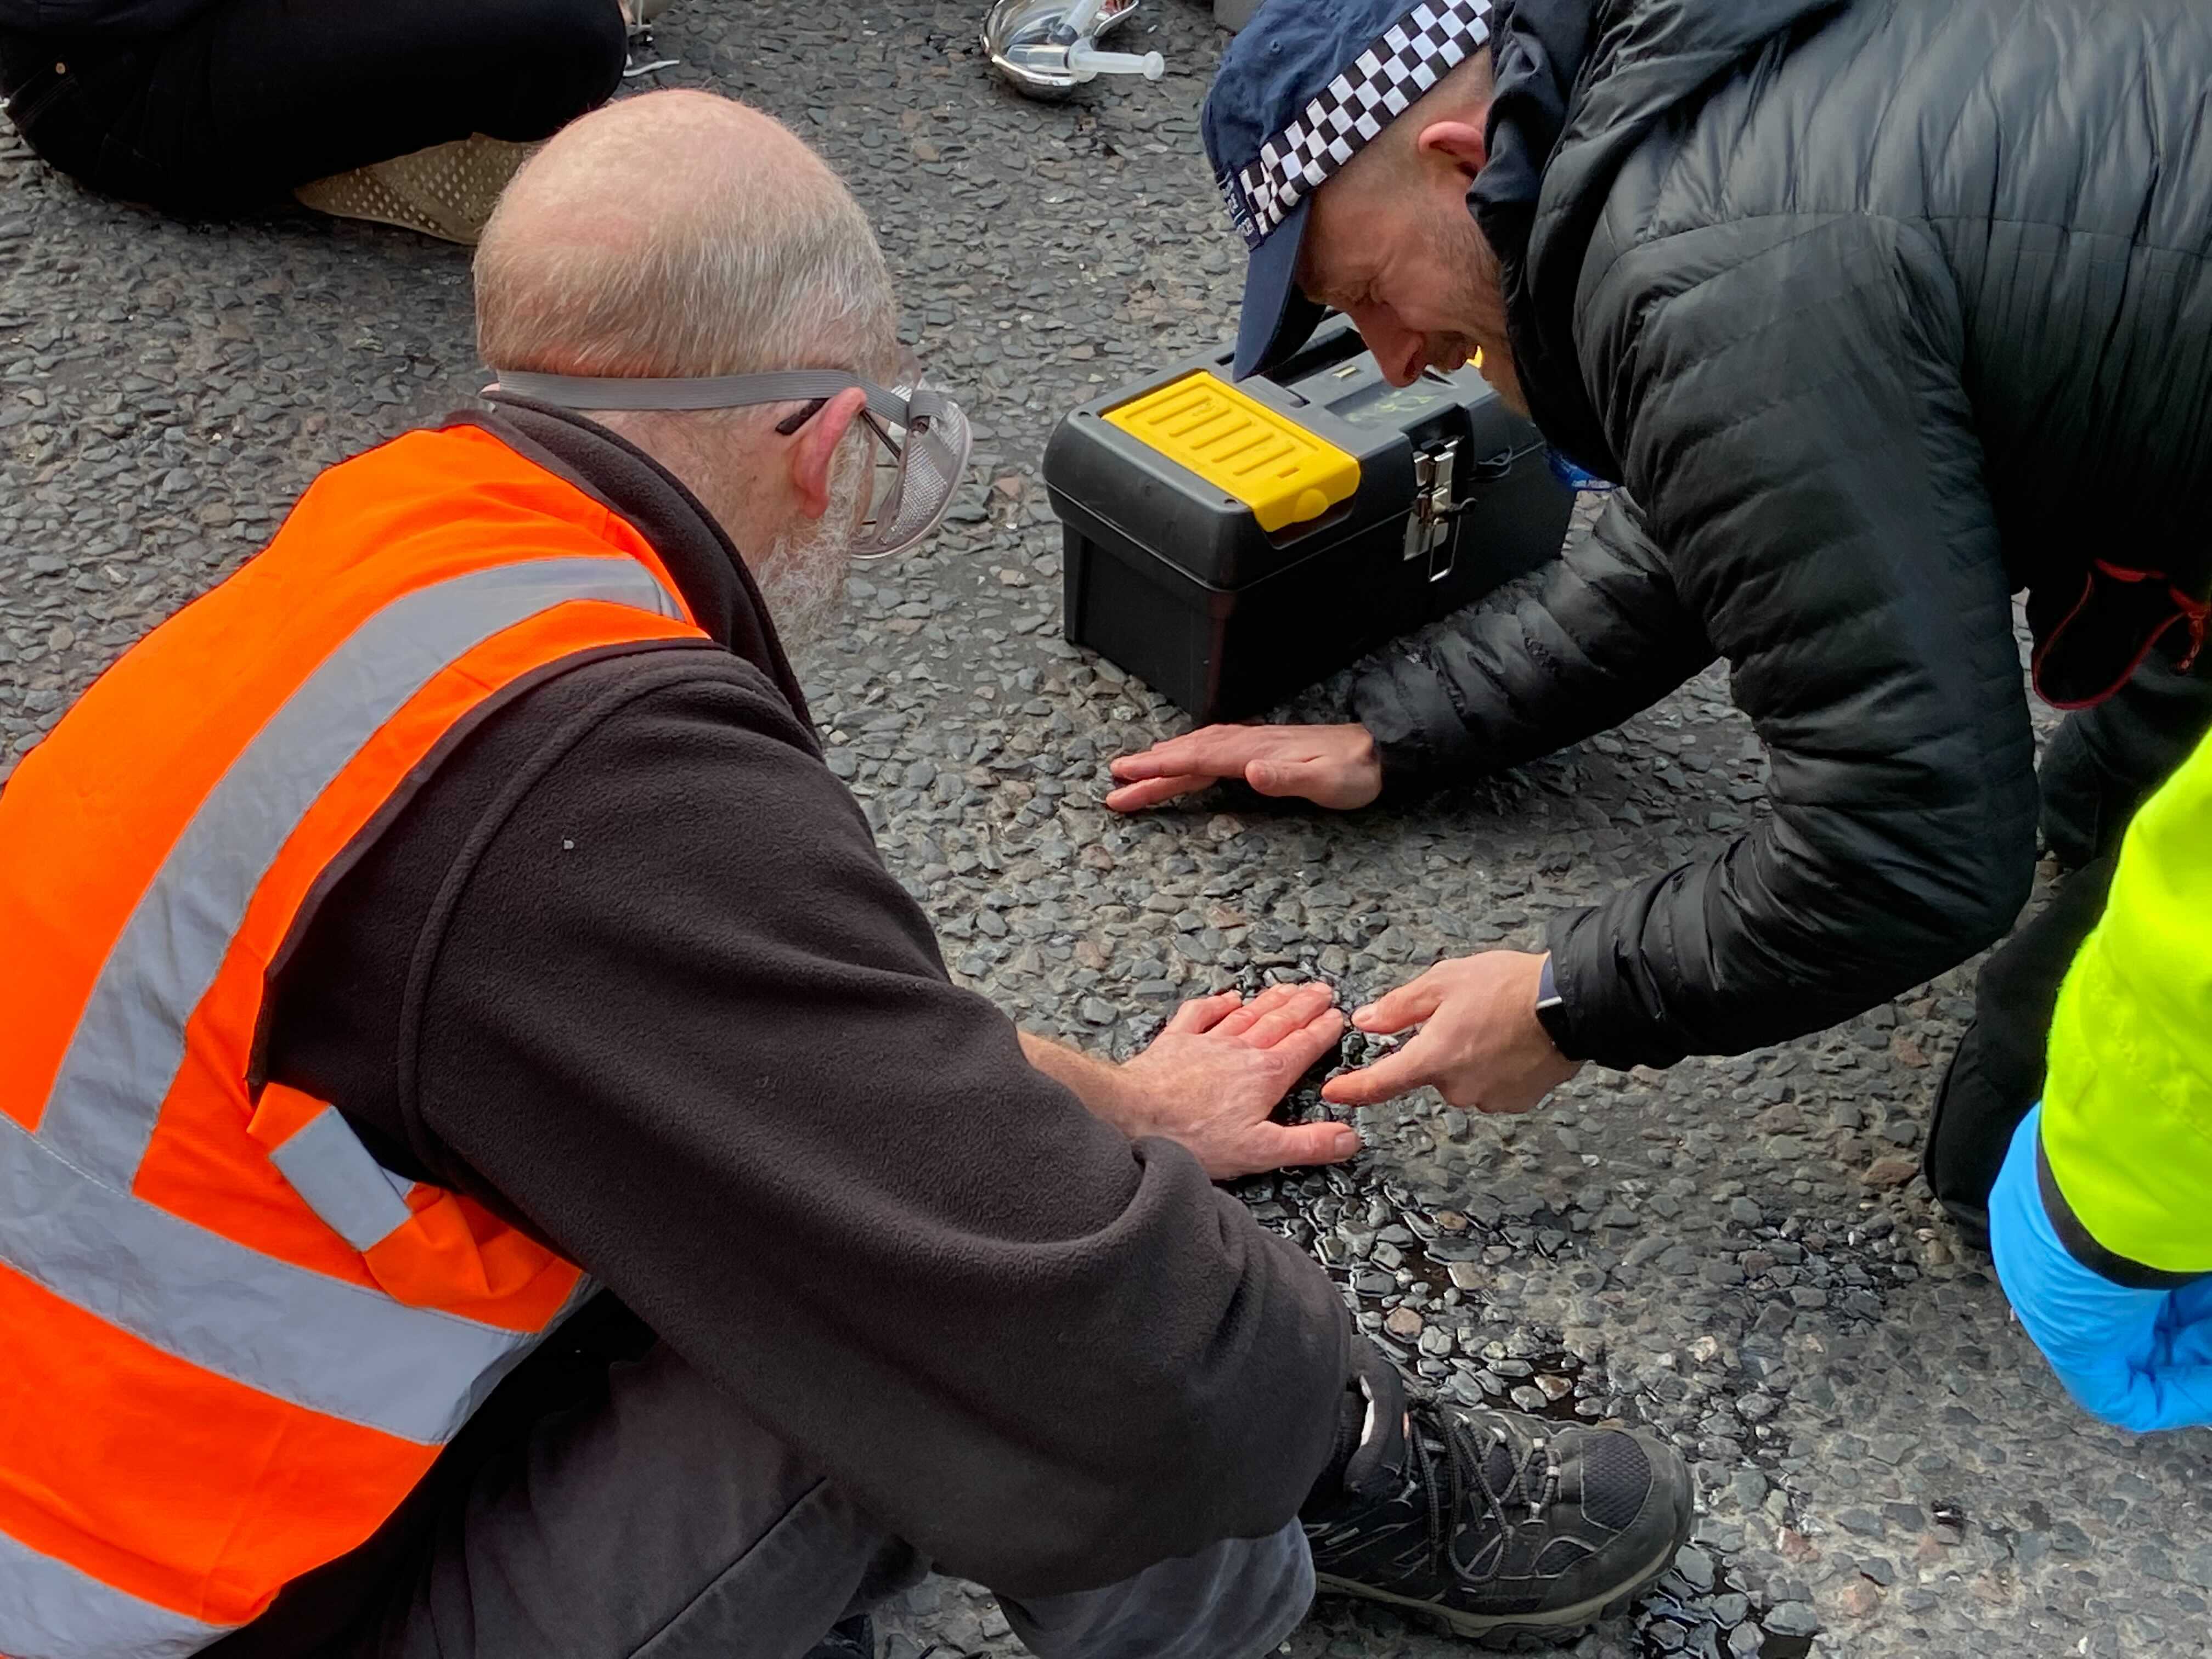 Insulate Britain activists glue themselves to ground outside parliament